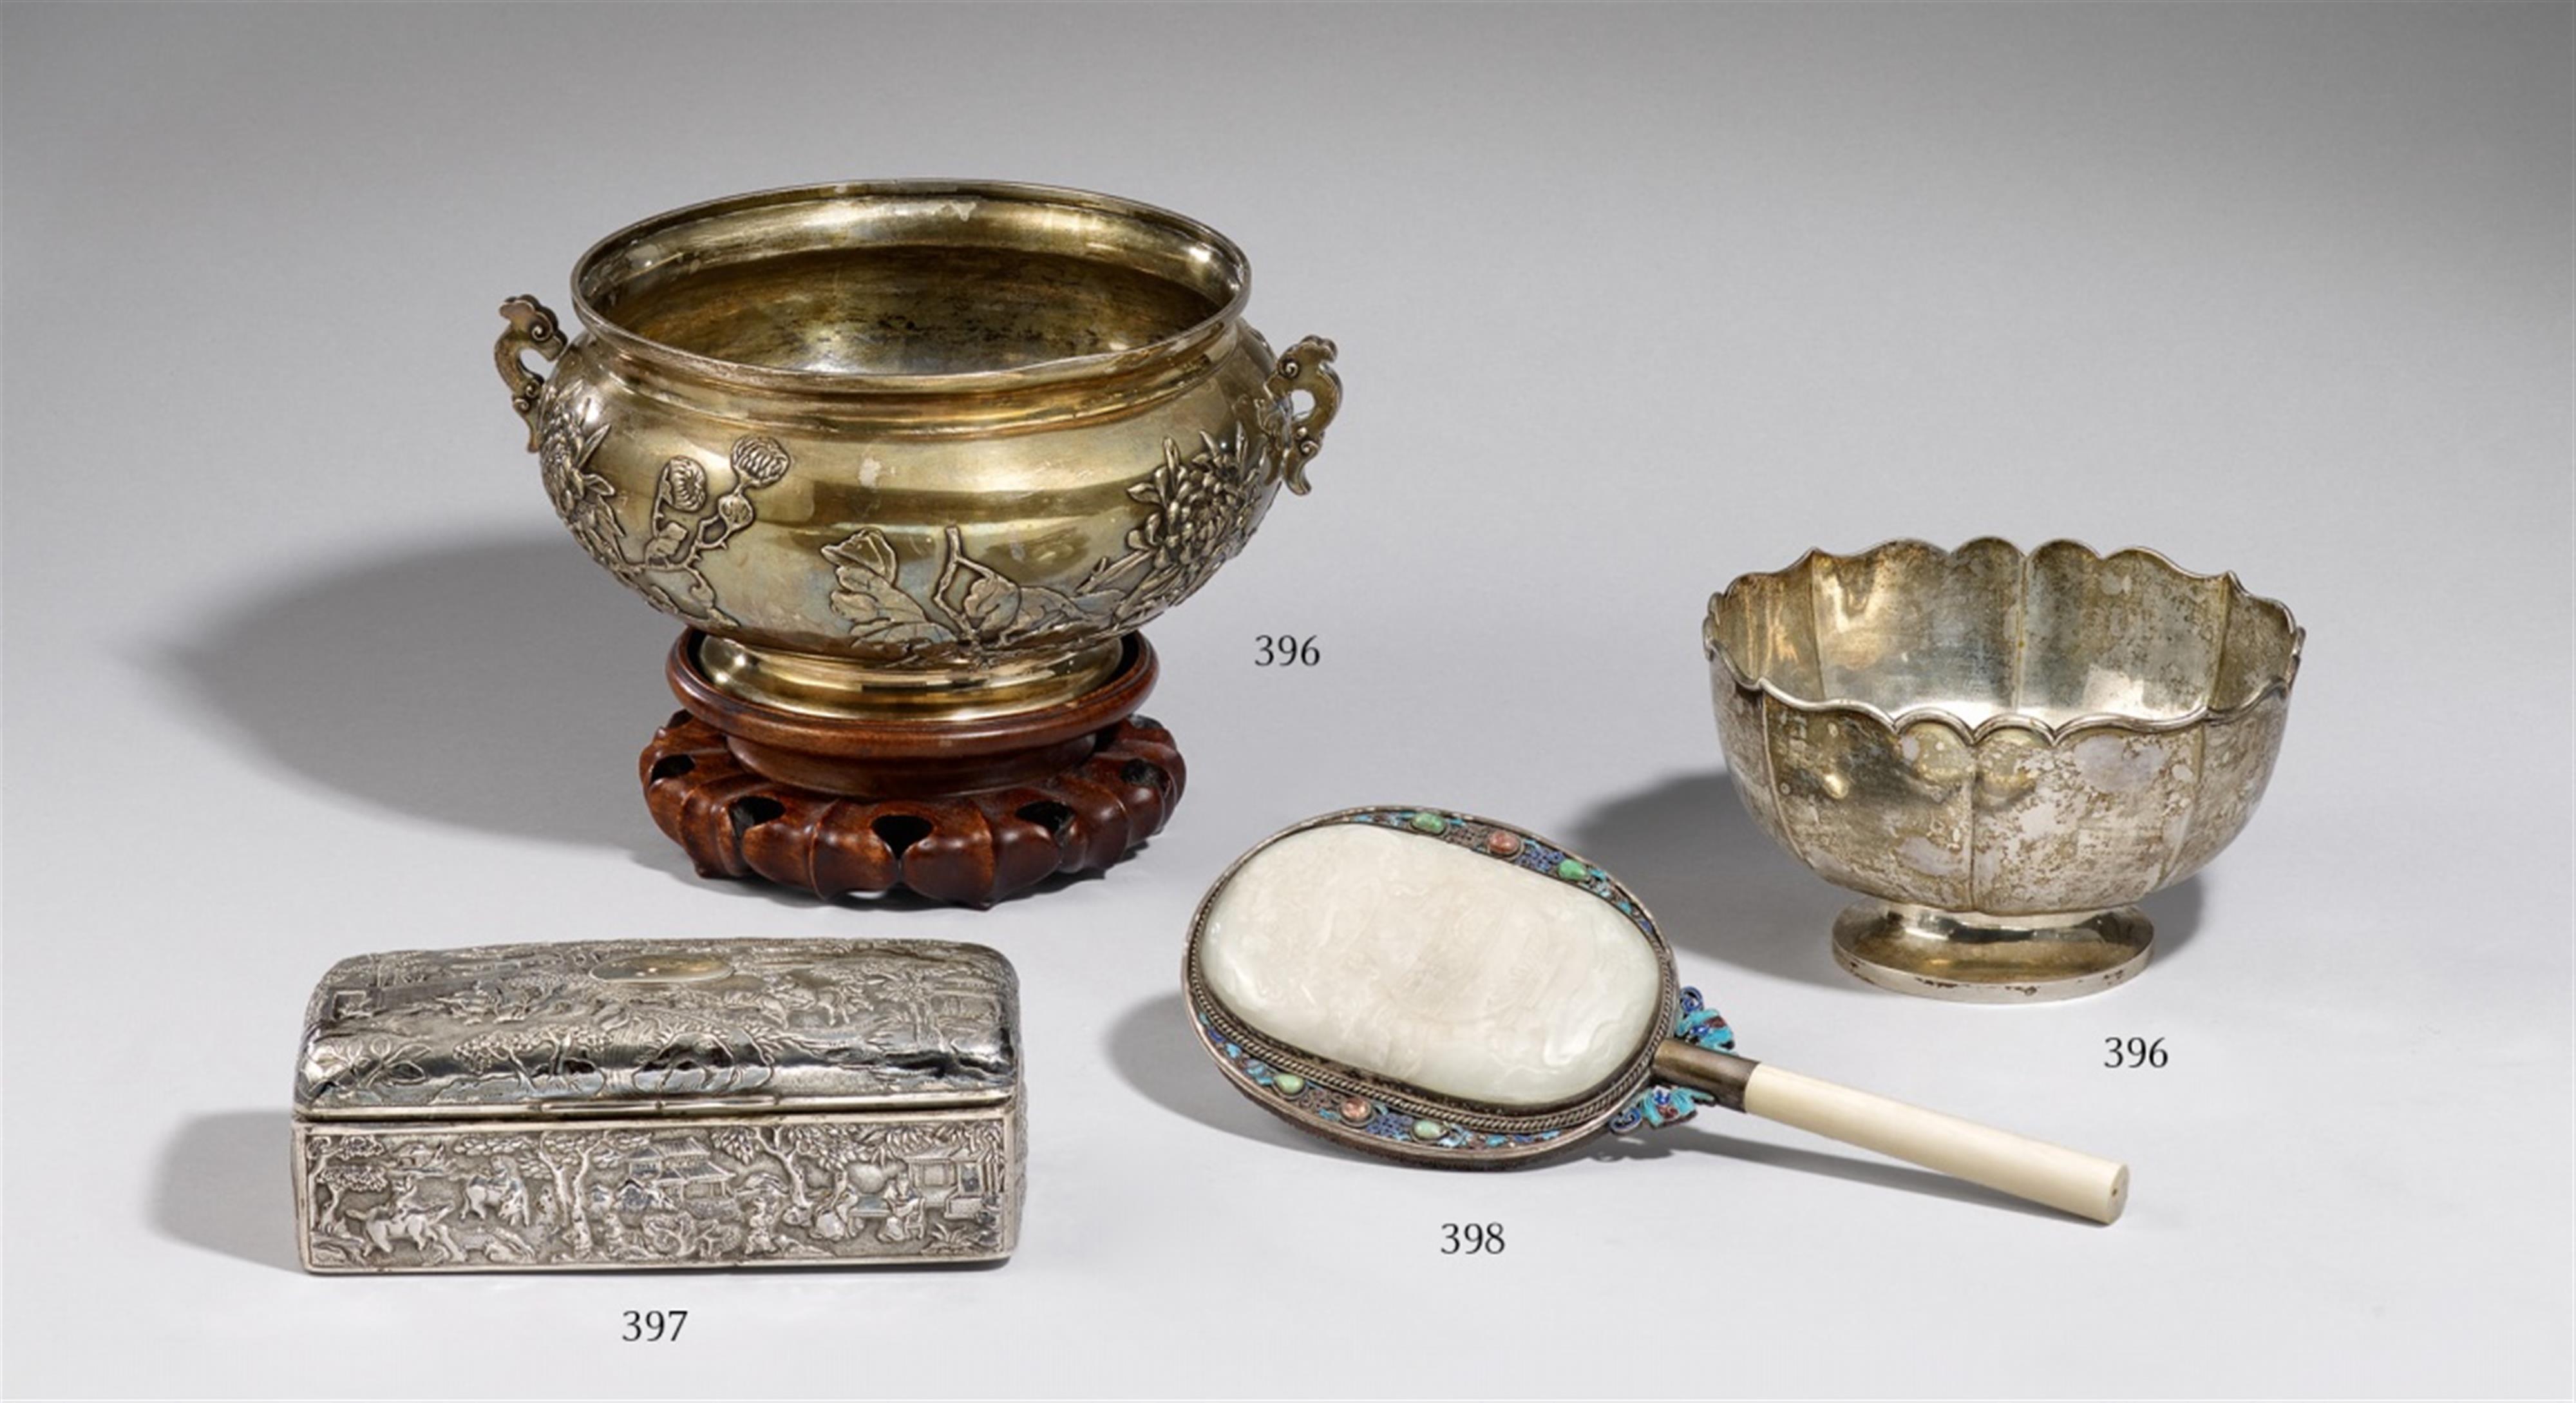 A hand mirror of silver, jade and ivory. Around 1900 - image-1